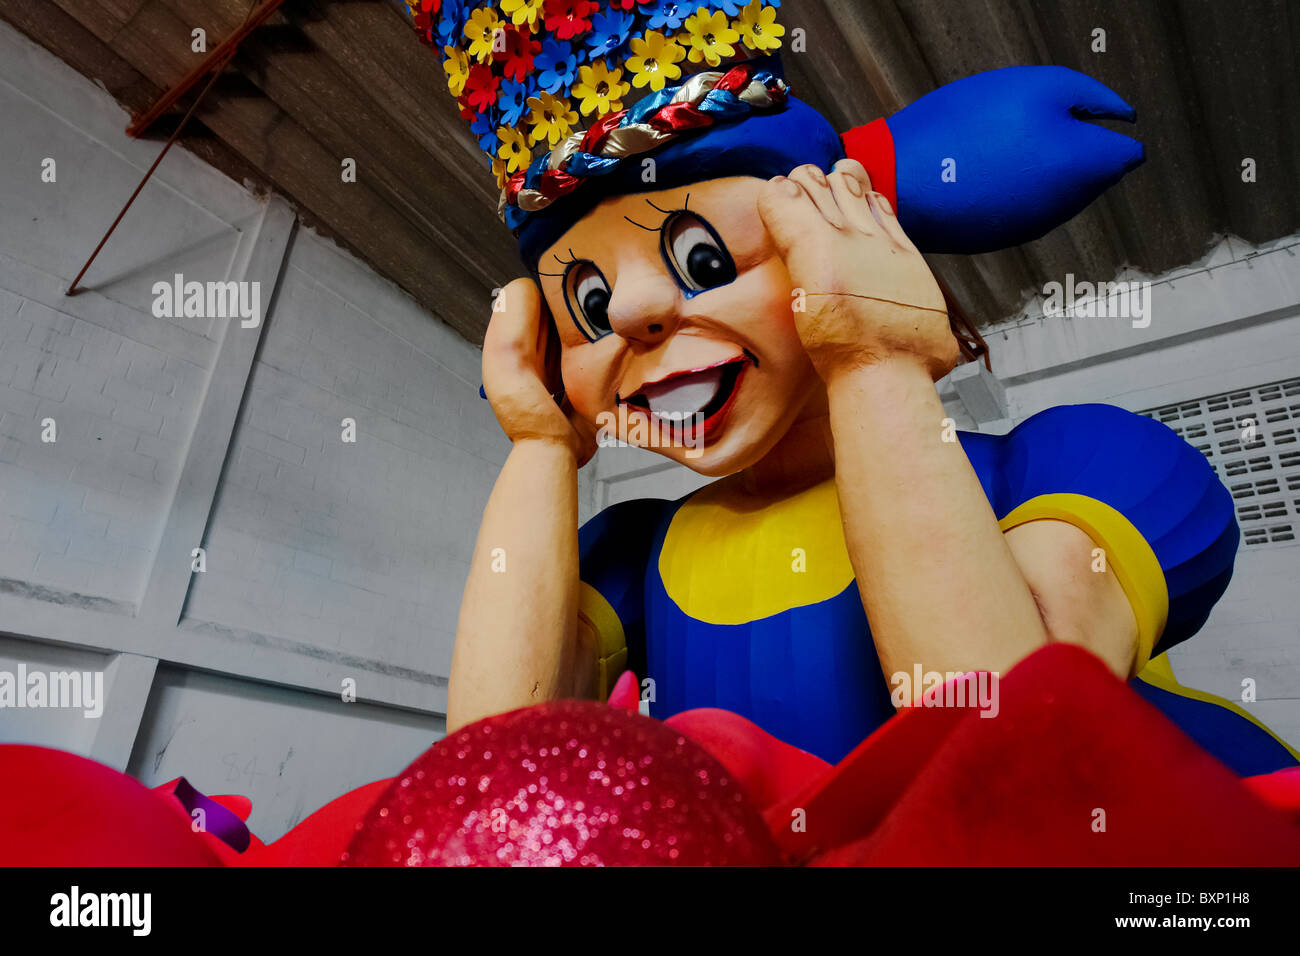 An allegorical statue during the construction process in the Carnival workroom, Barranquilla, Colombia. Stock Photo